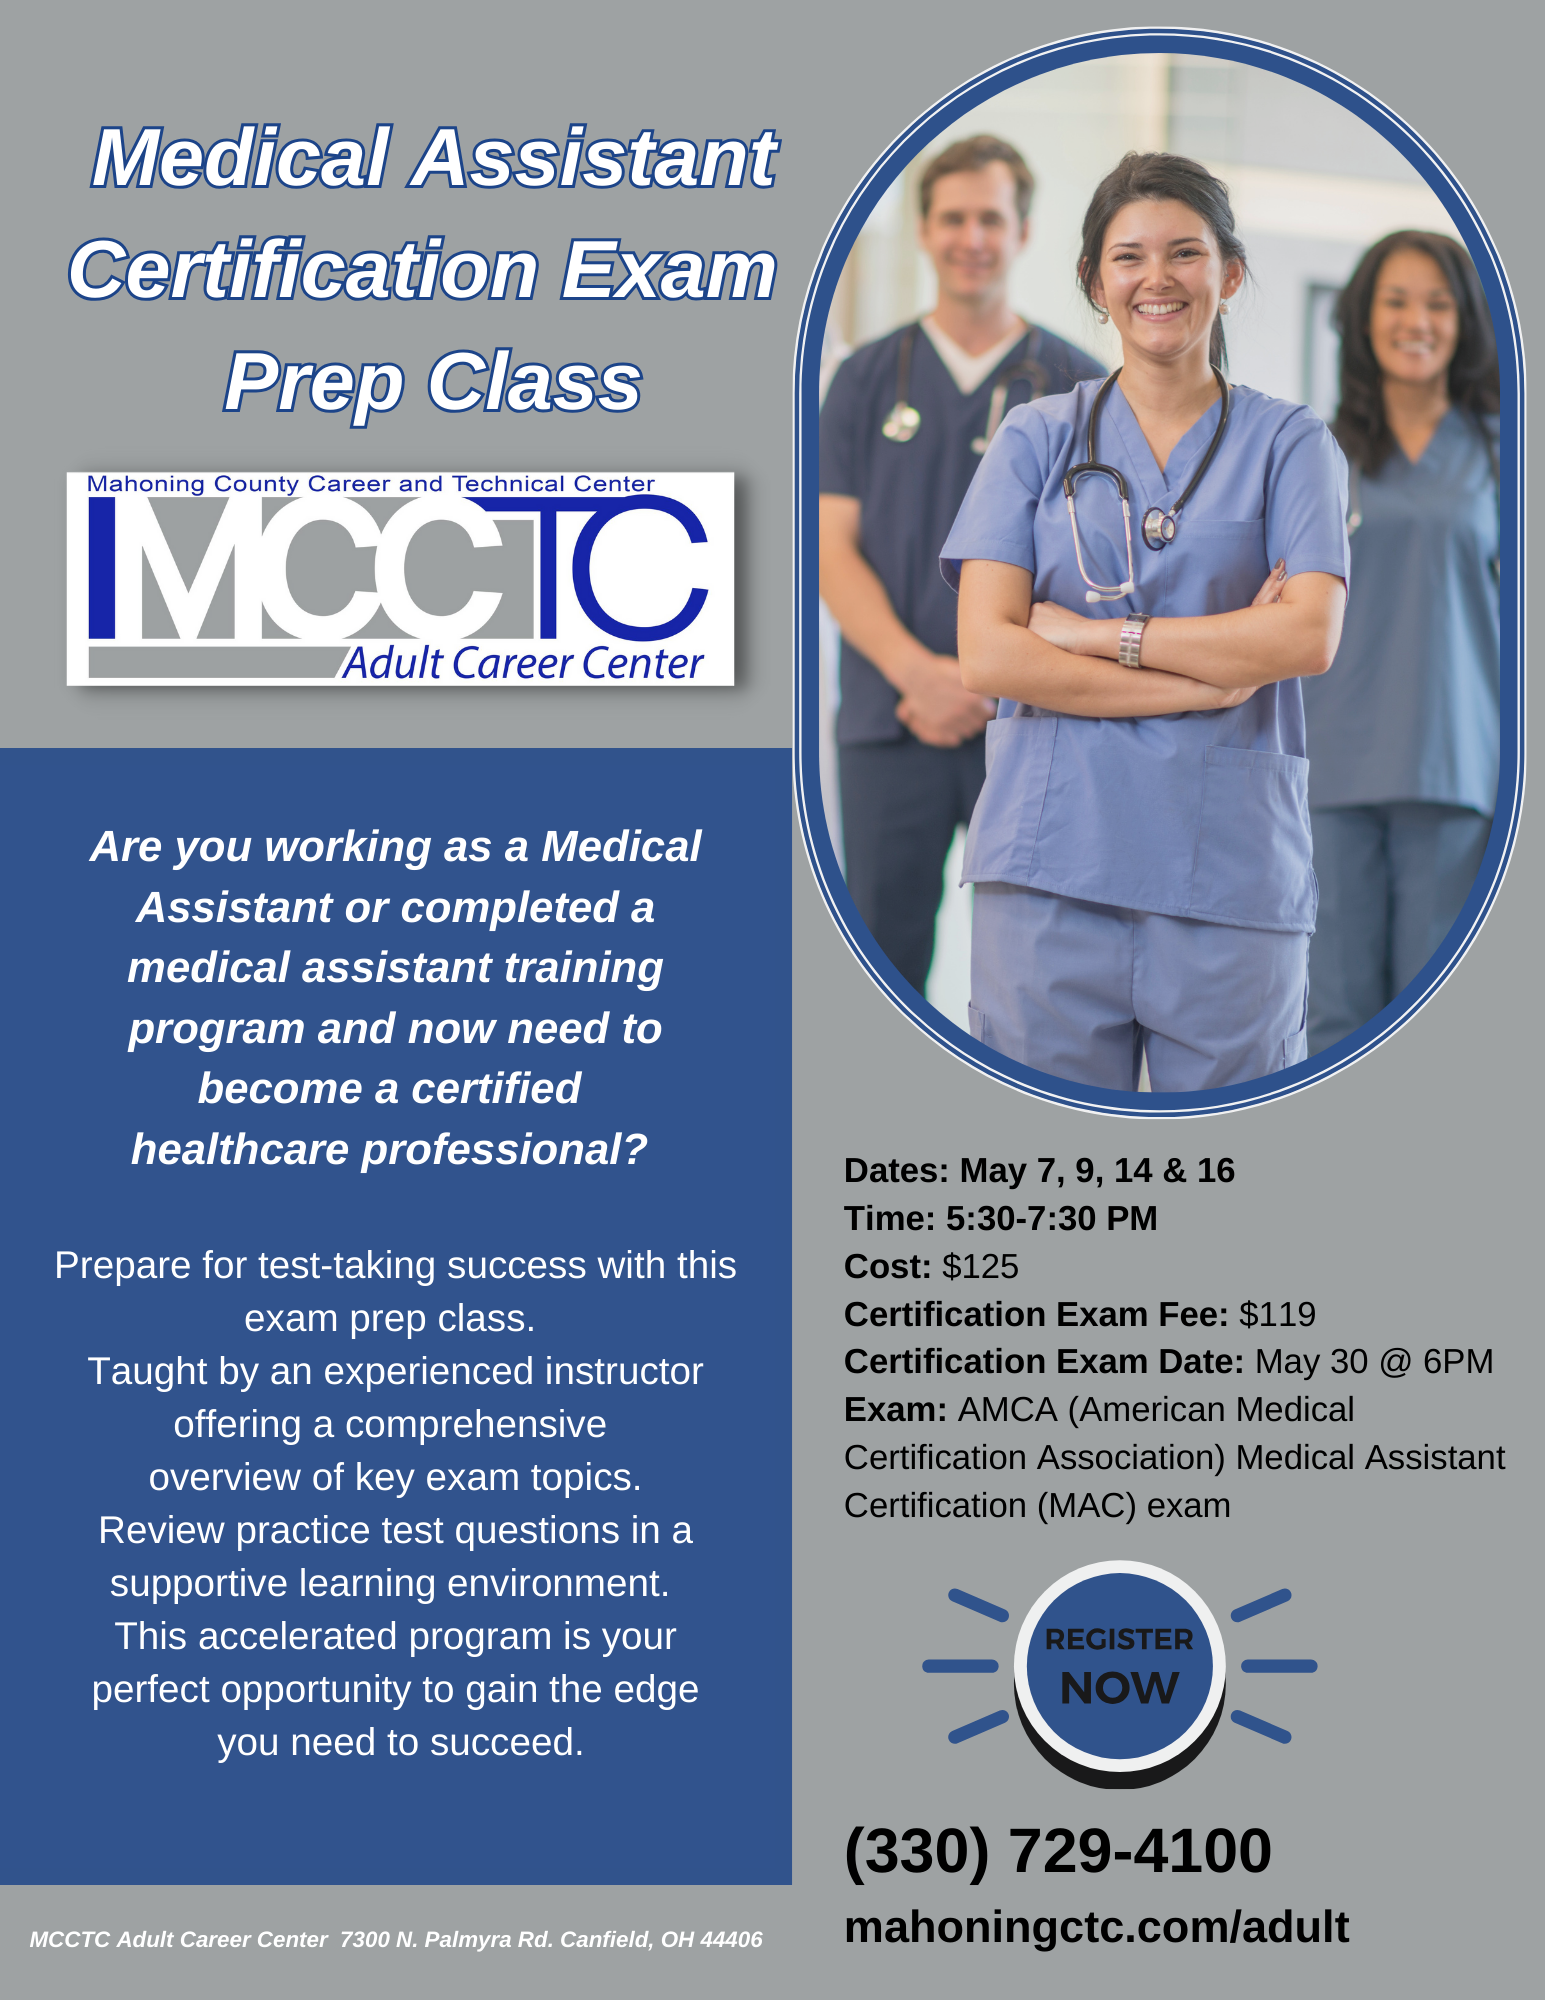 NEW Medical Assistant Certification Exam Prep Class